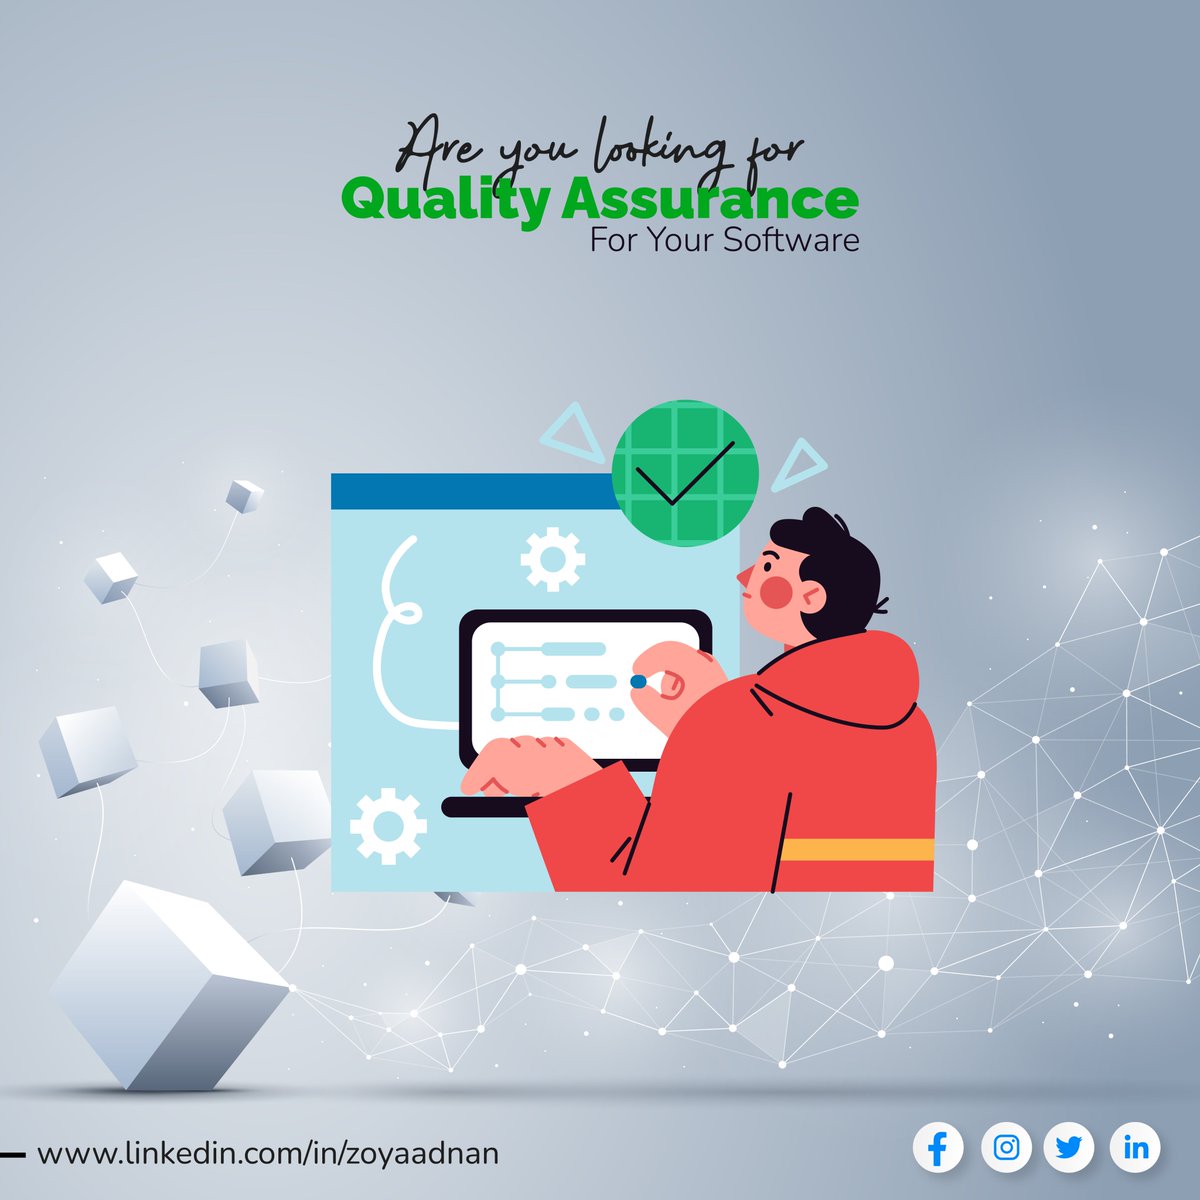 We deliver an uncompromised quality through complete automation of the testing process, offering a competitive advantage of a reliable and efficient software solution.
#softwaretester #software #testautomation #tester
#seleniumwebdriver #iso #testers #java #softwaredevelopment